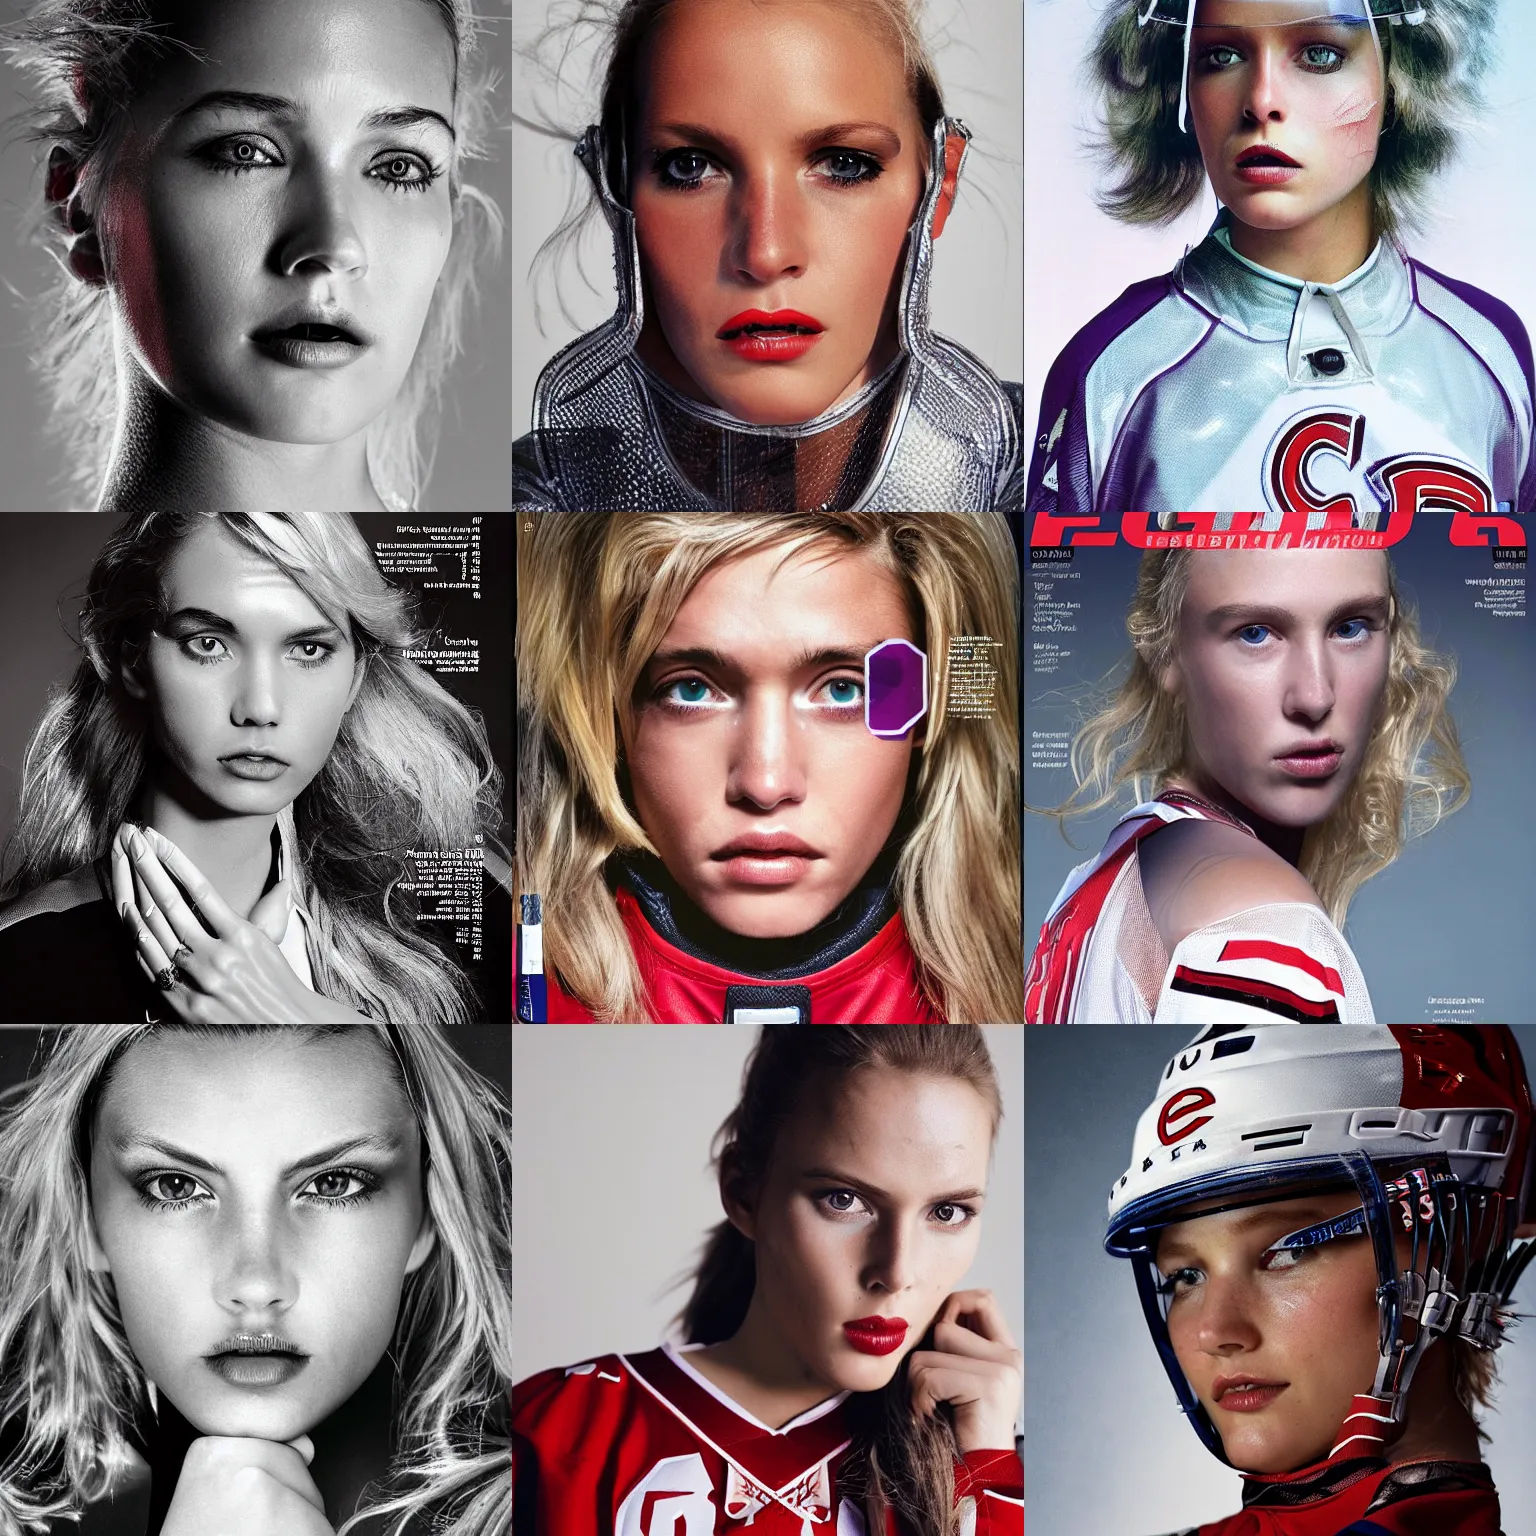 Prompt: beautiful extreme closeup portrait photo of frontiers in female supermodel ice hockey player fashion magazine September retrofuturism Habs edition, highly detailed, soft lighting